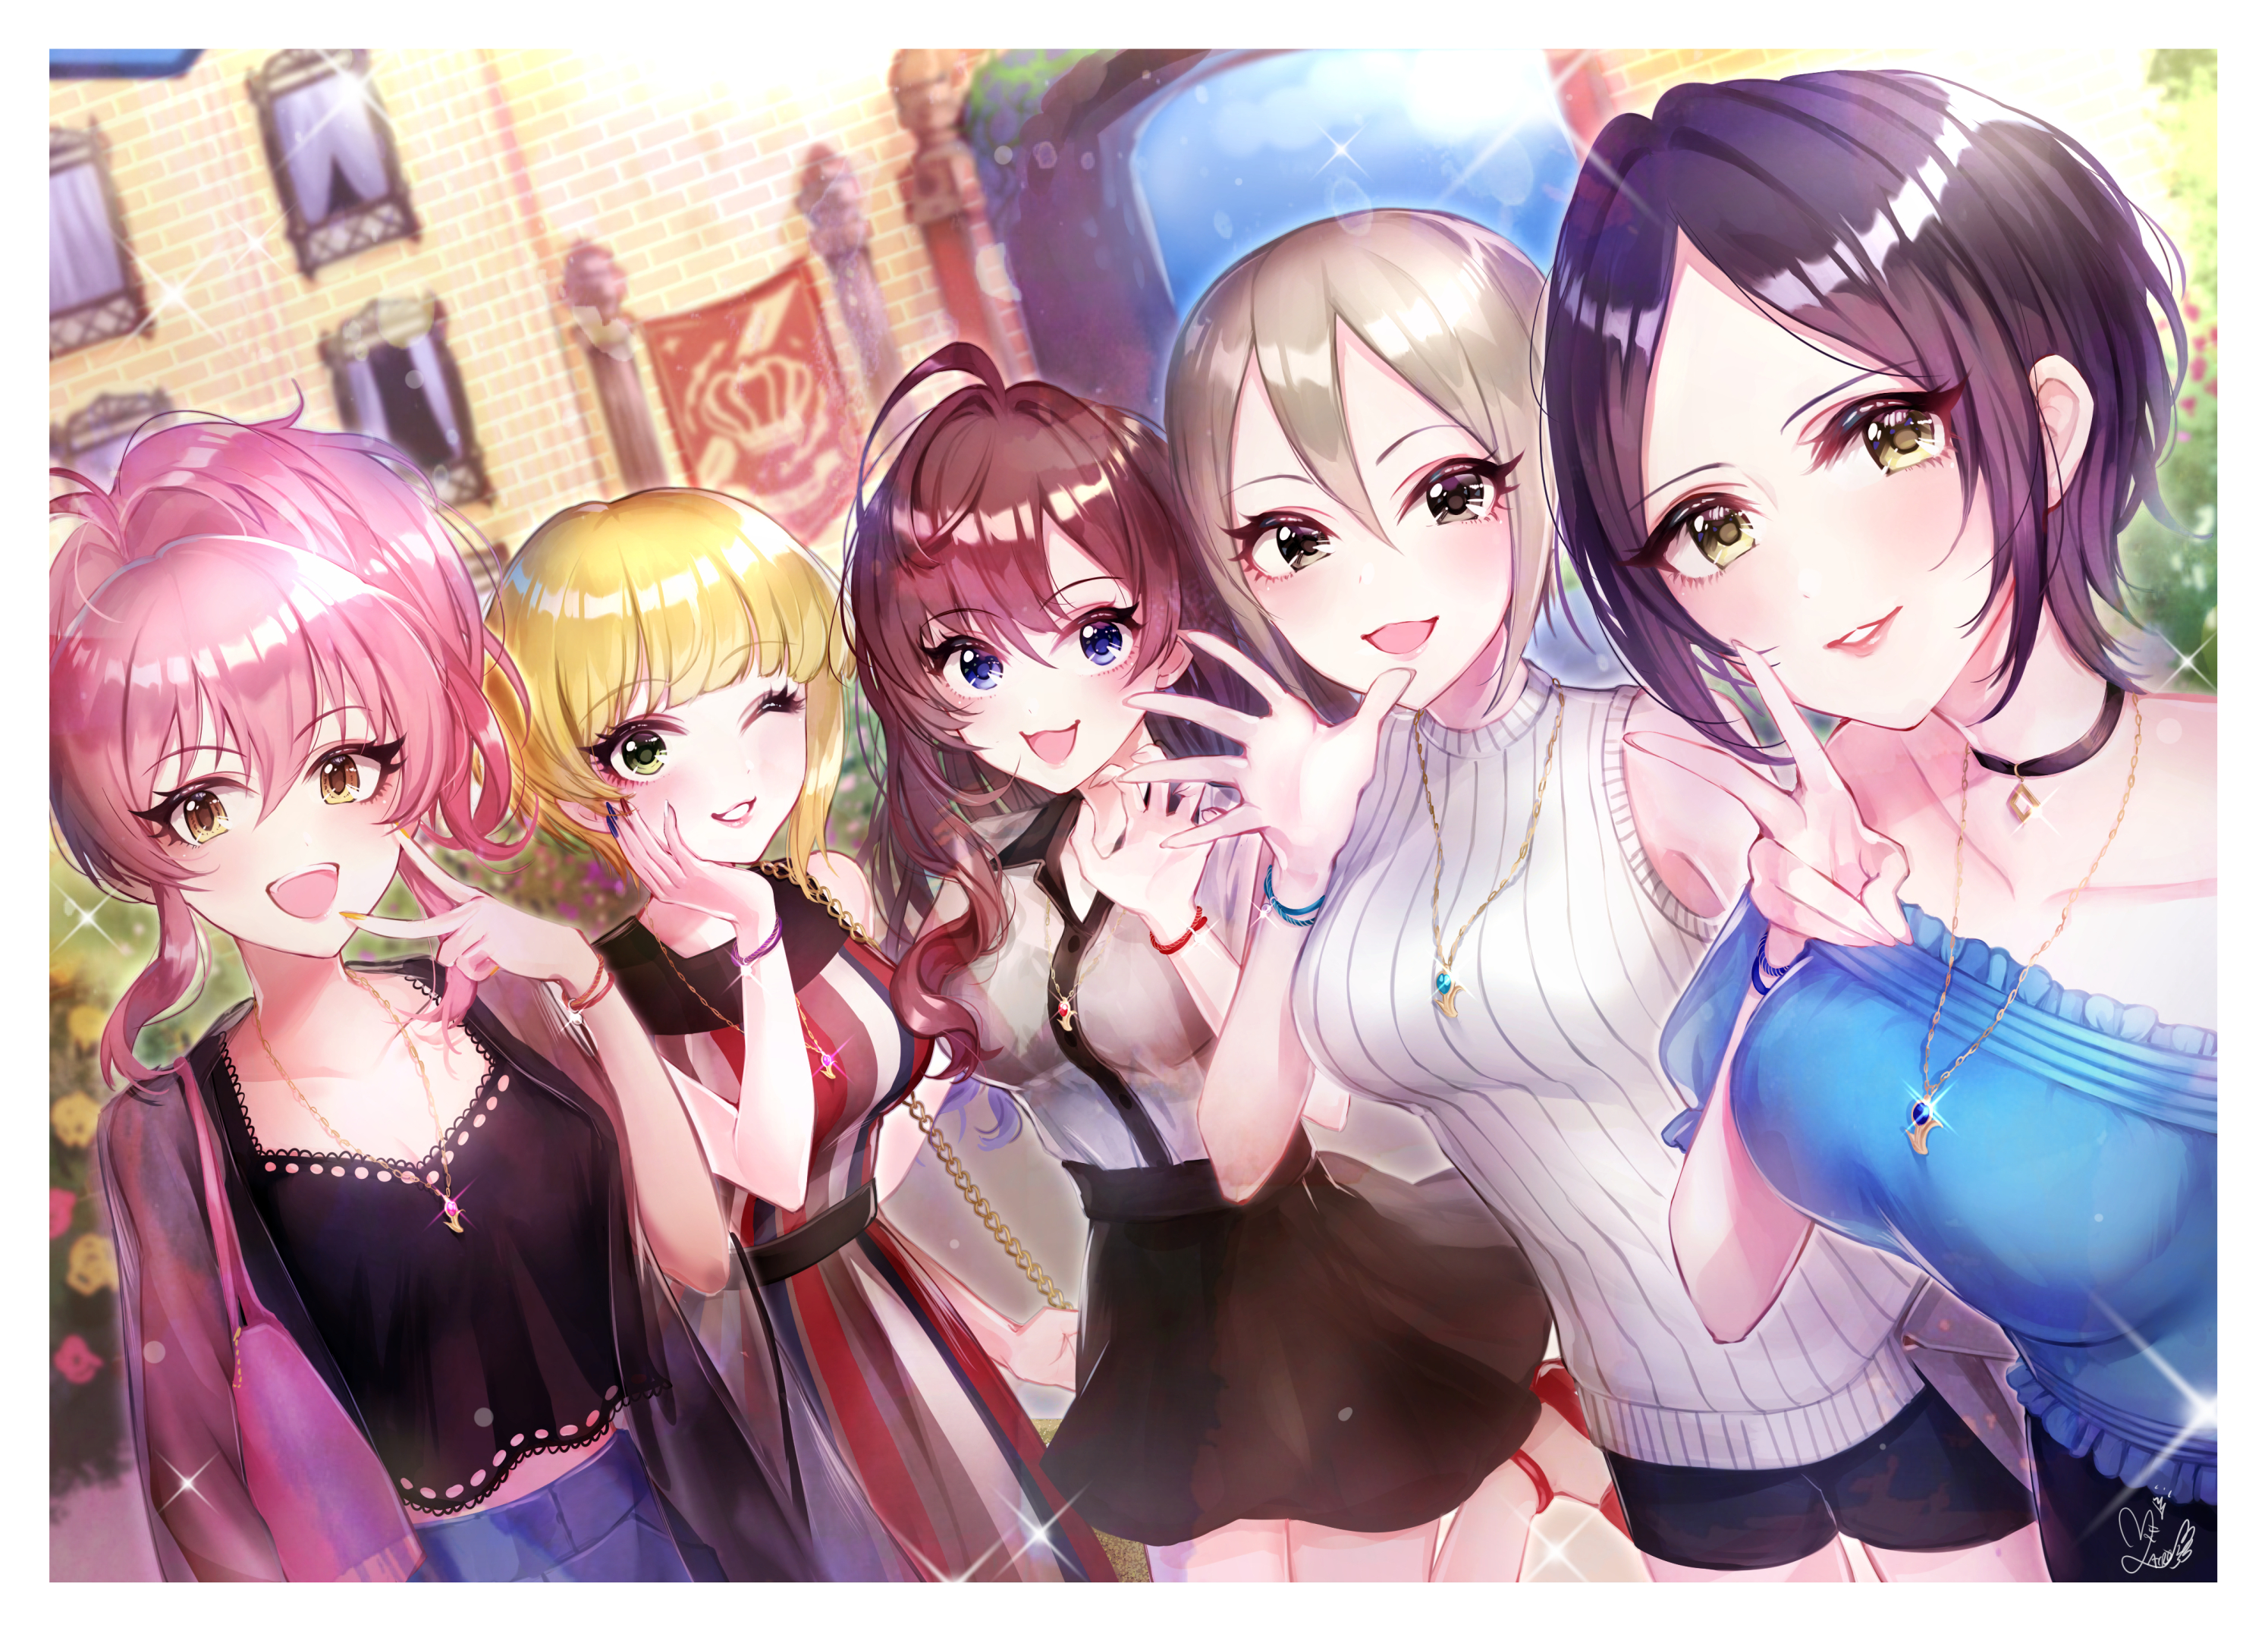 Anime 2990x2150 anime girls anime THE iDOLM@STER necklace choker one eye closed group of women